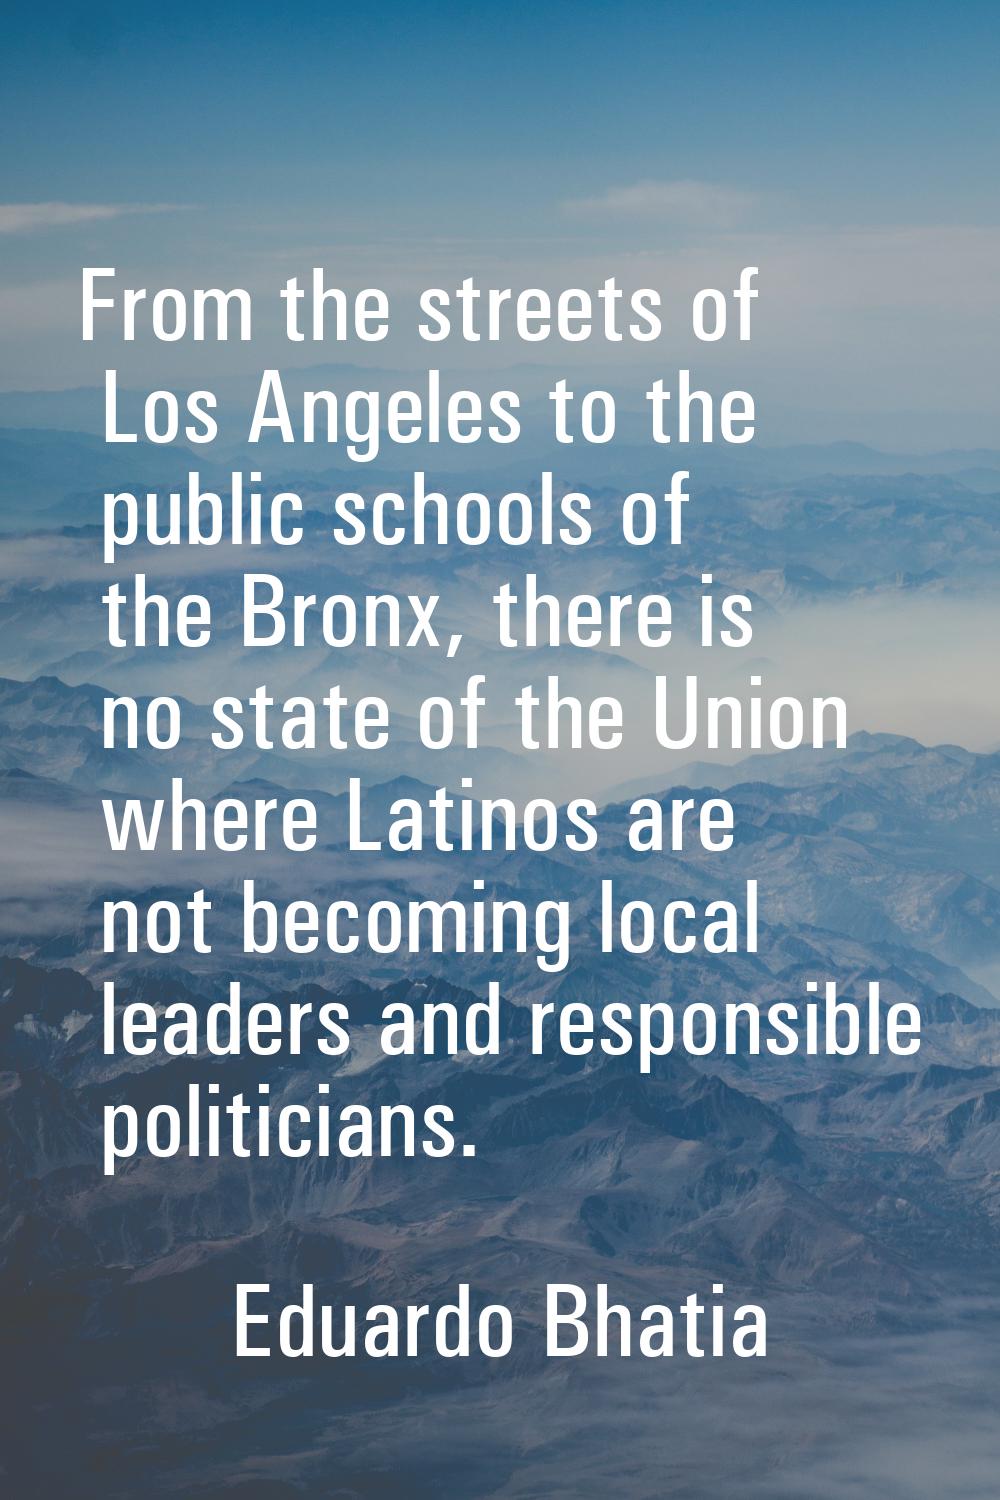 From the streets of Los Angeles to the public schools of the Bronx, there is no state of the Union 